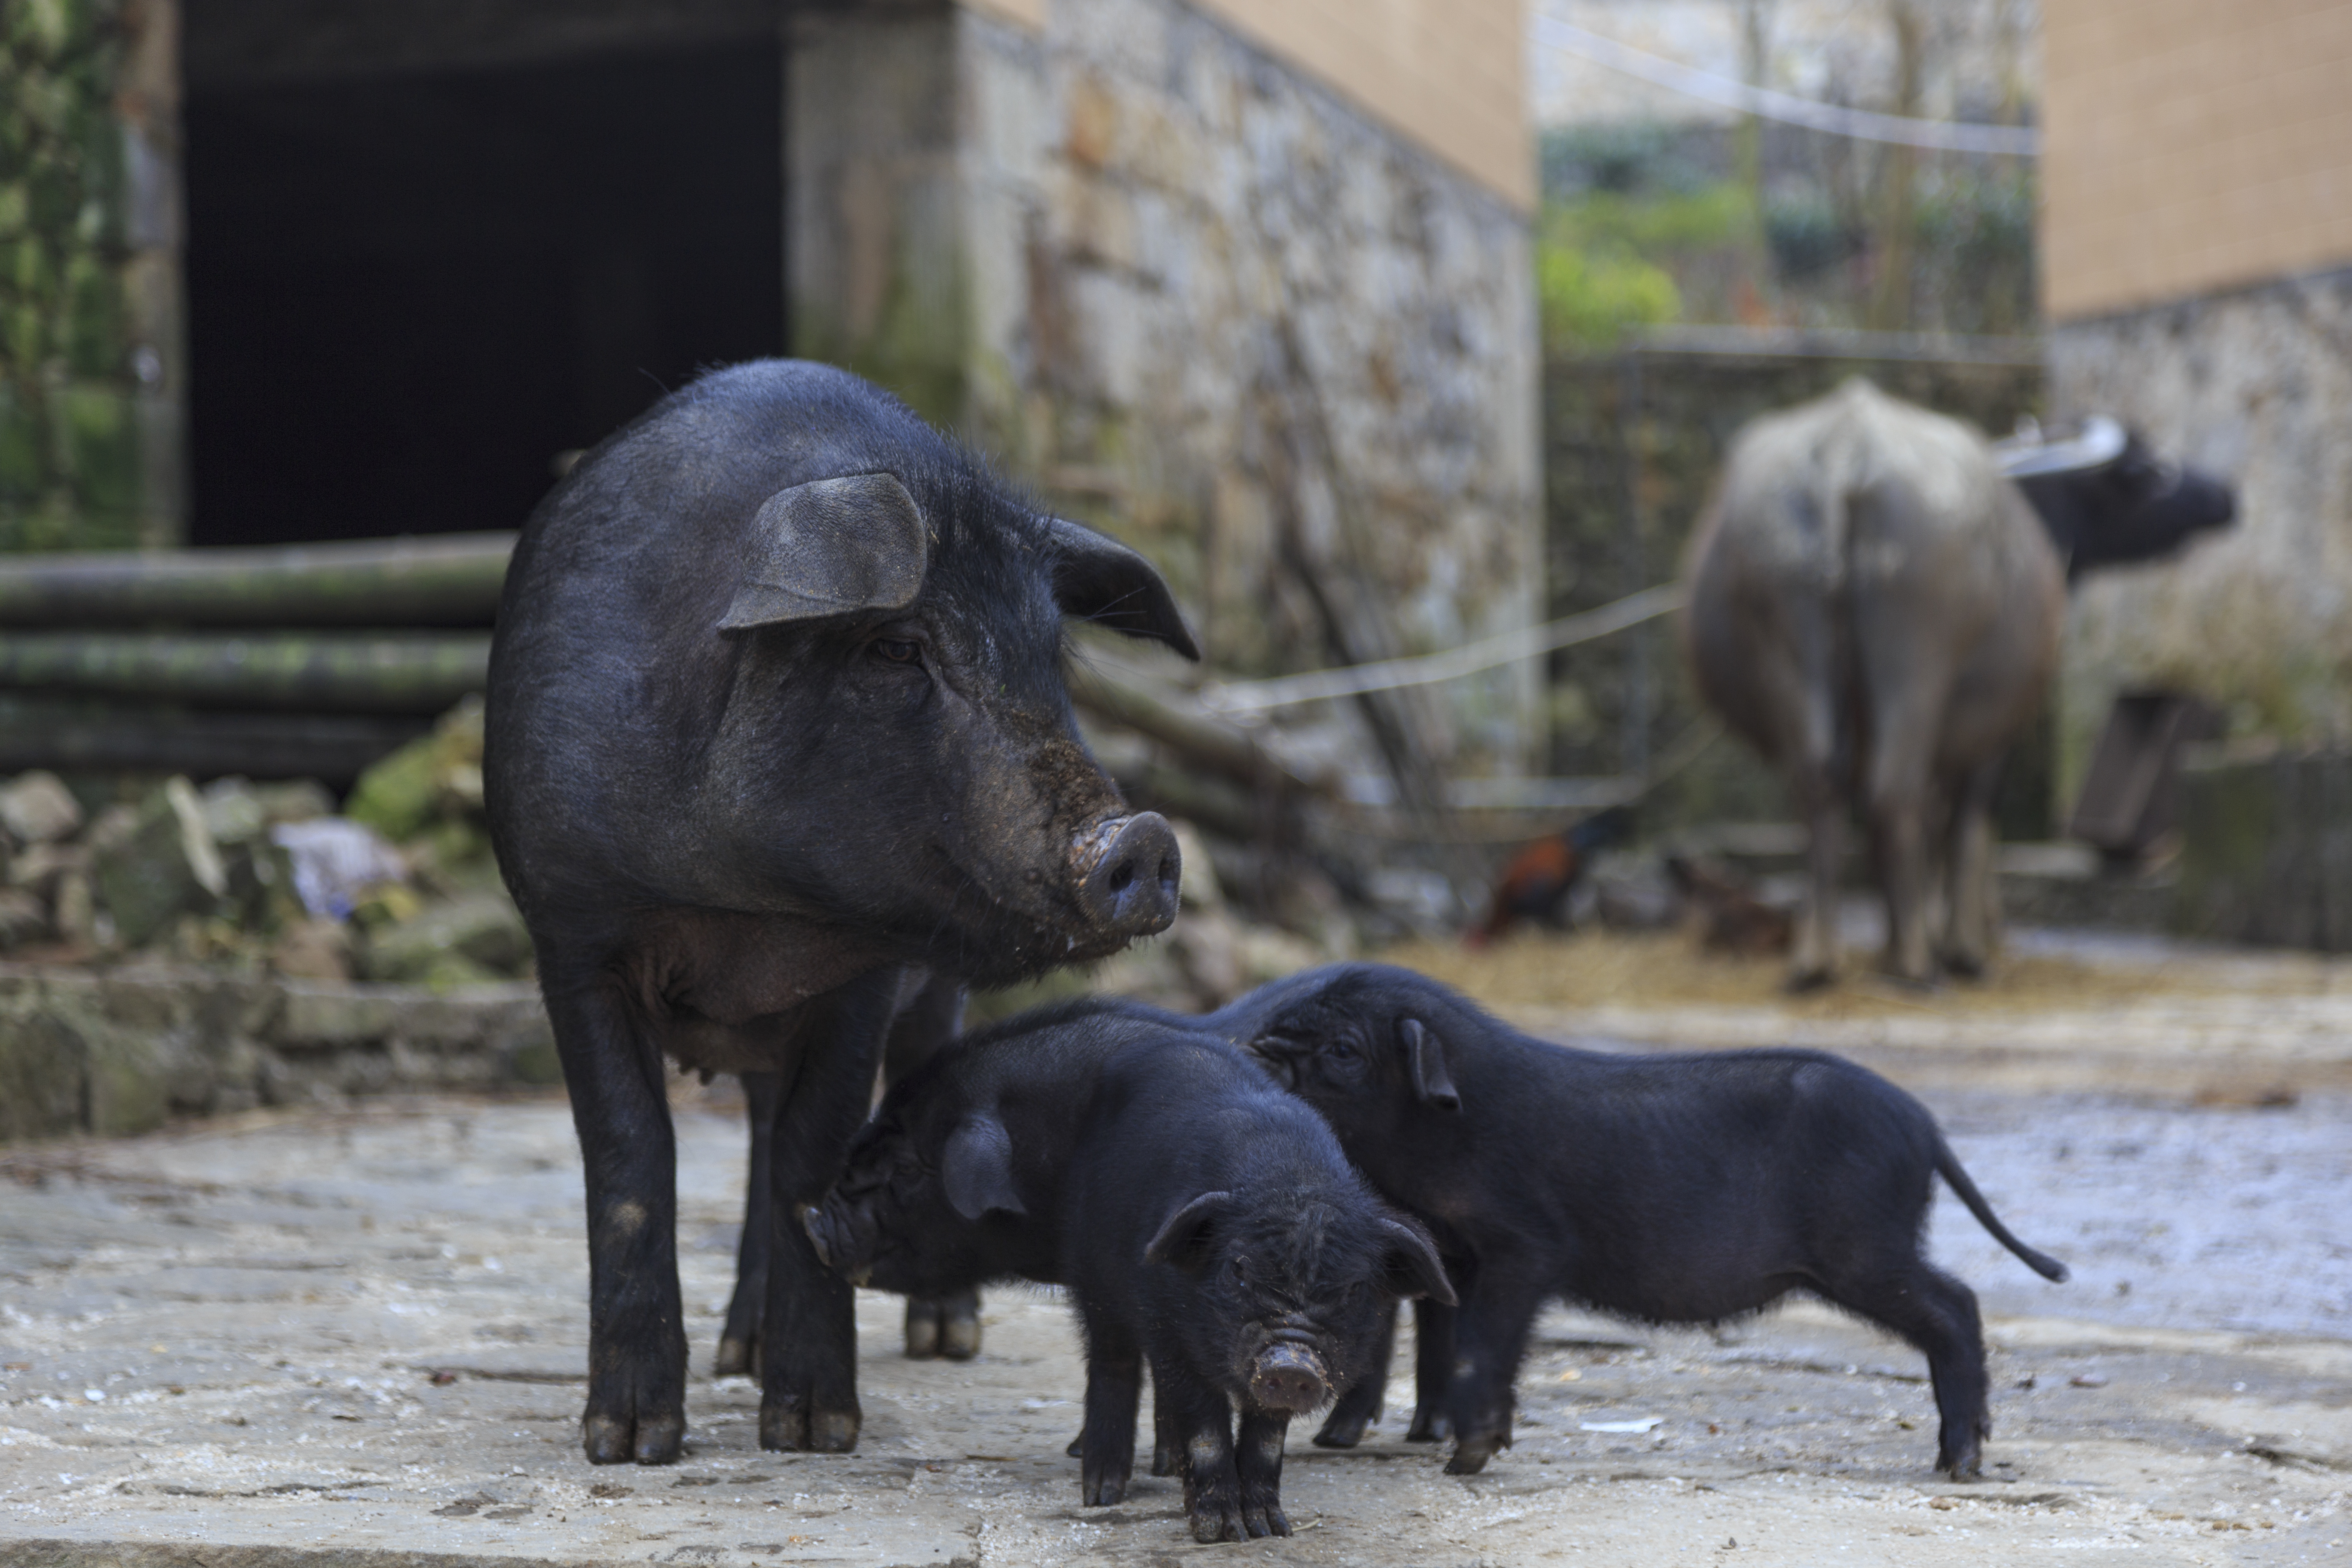 piglets and sow standing in backyard enclosure in China